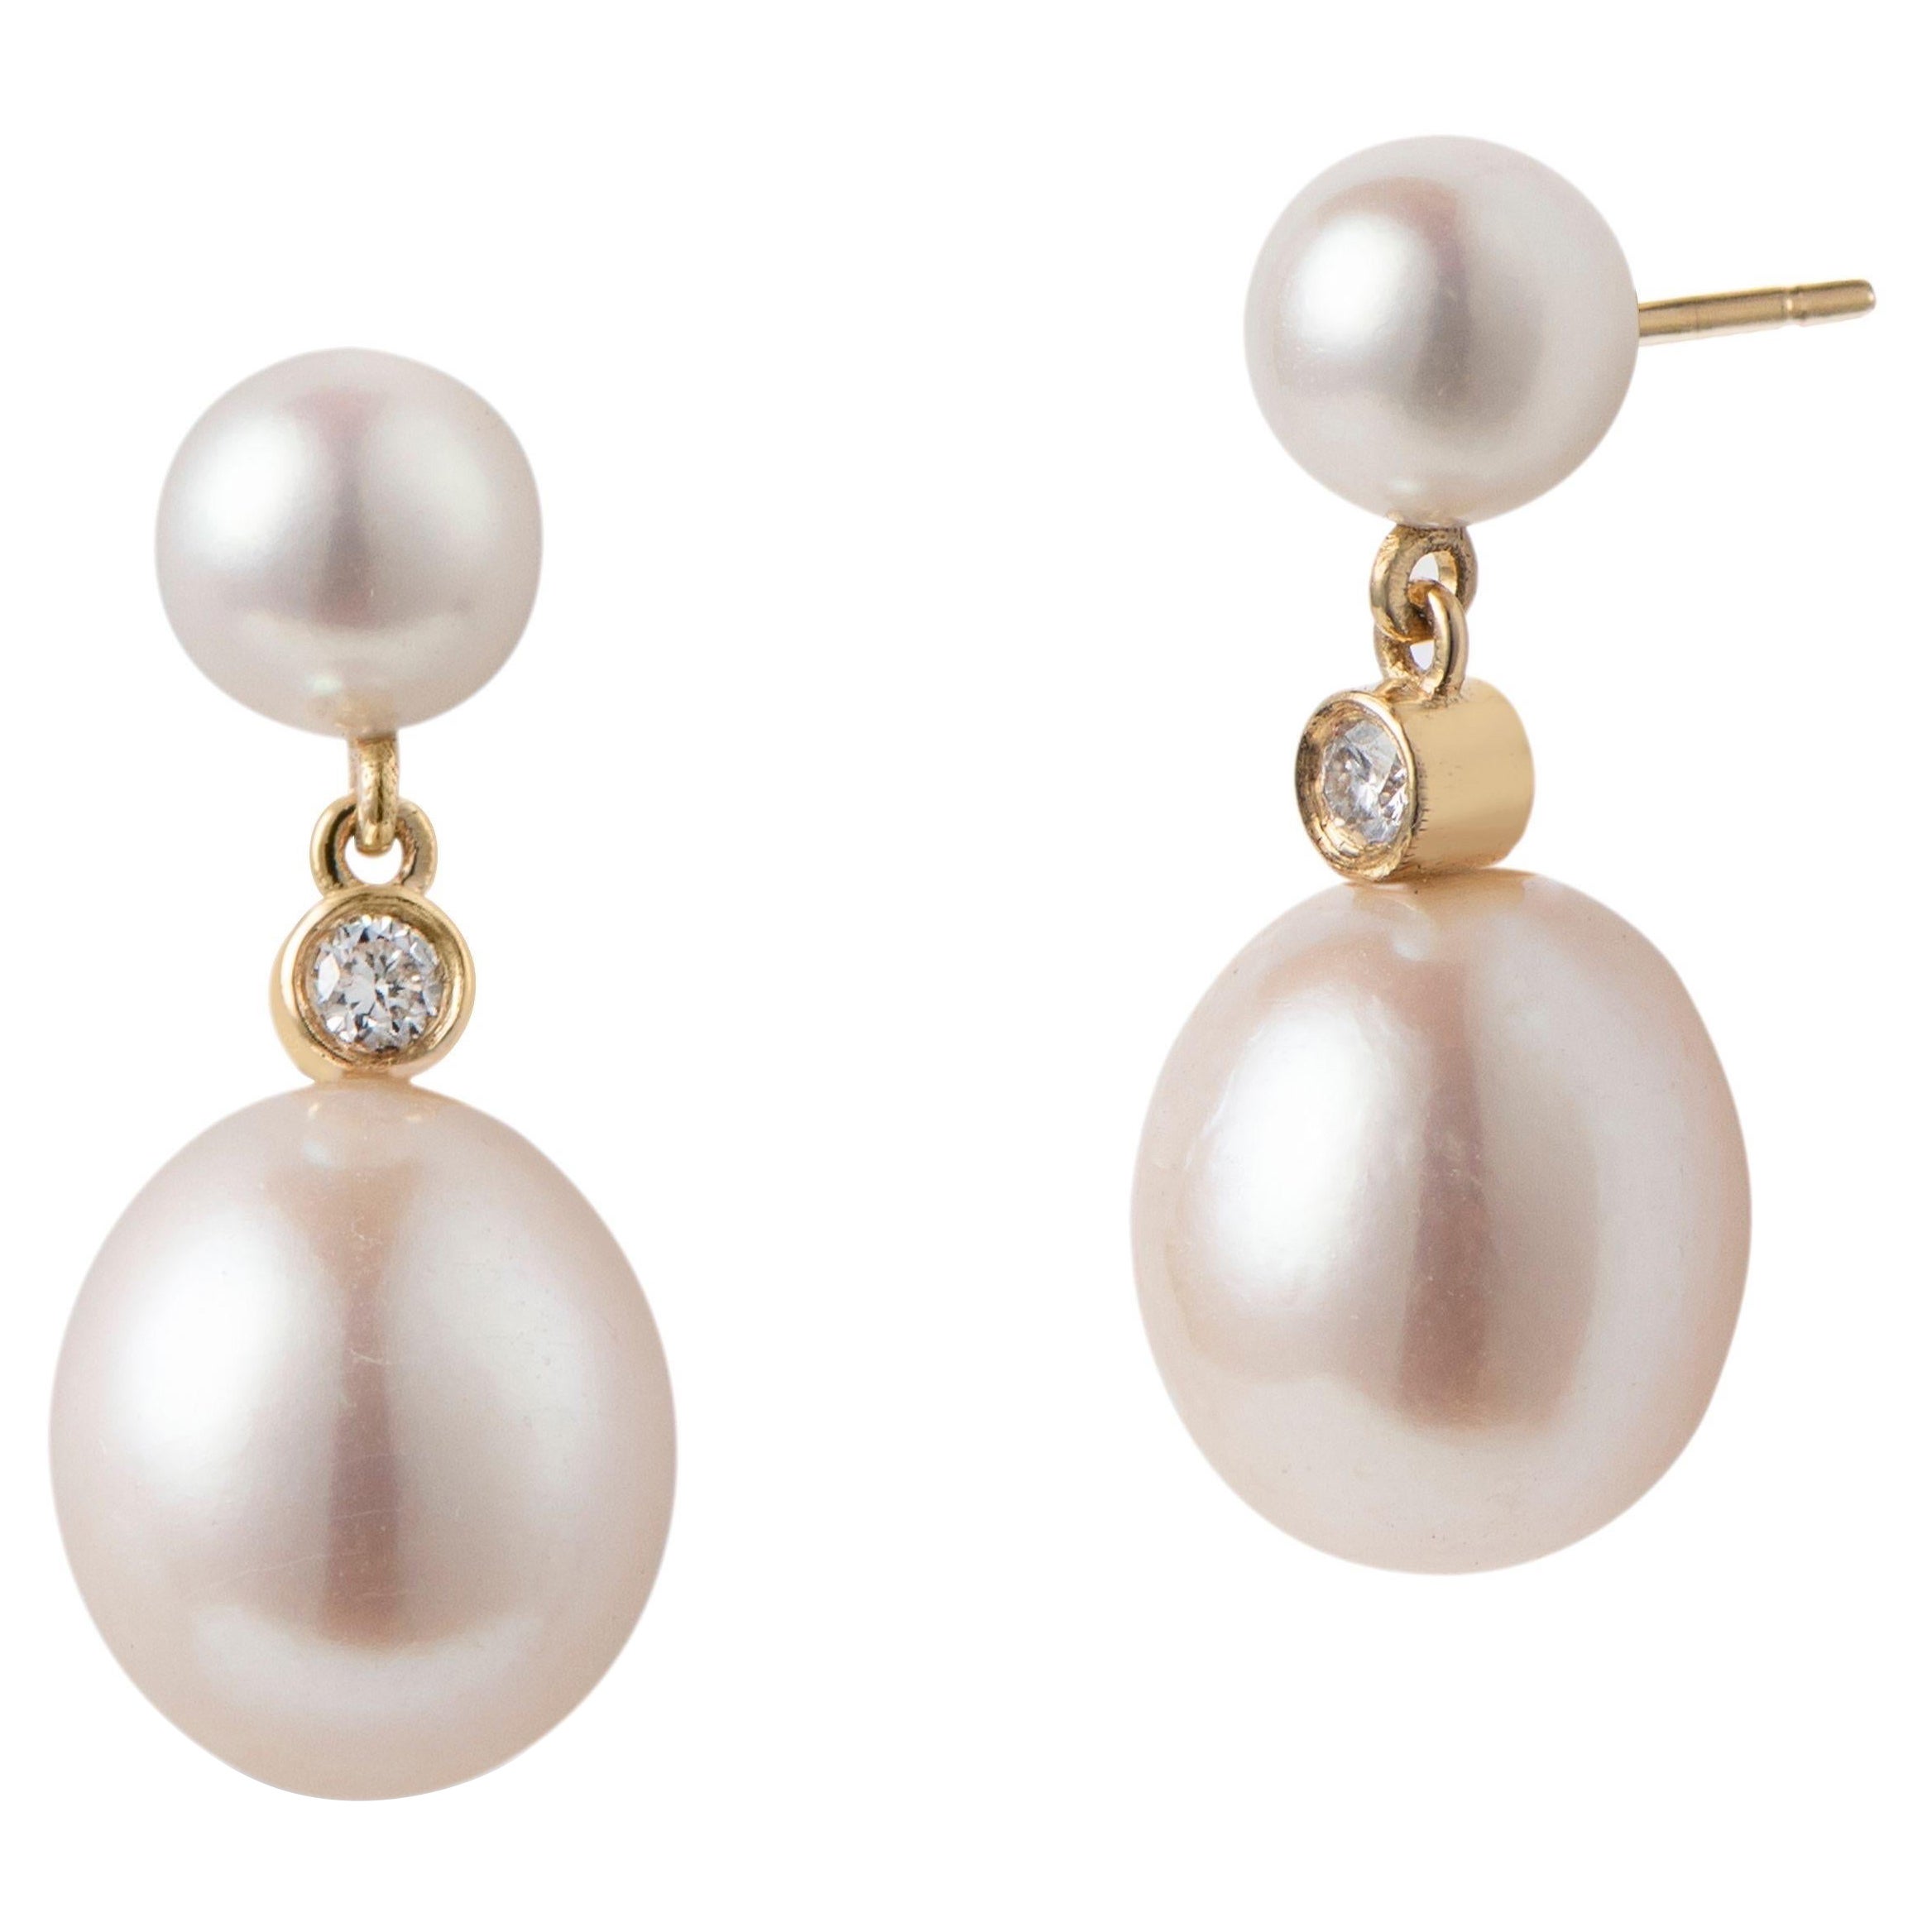 Double Drop Pearl Earrings with 0.08ctw diamond, 18K Gold, by Michelle Massoura